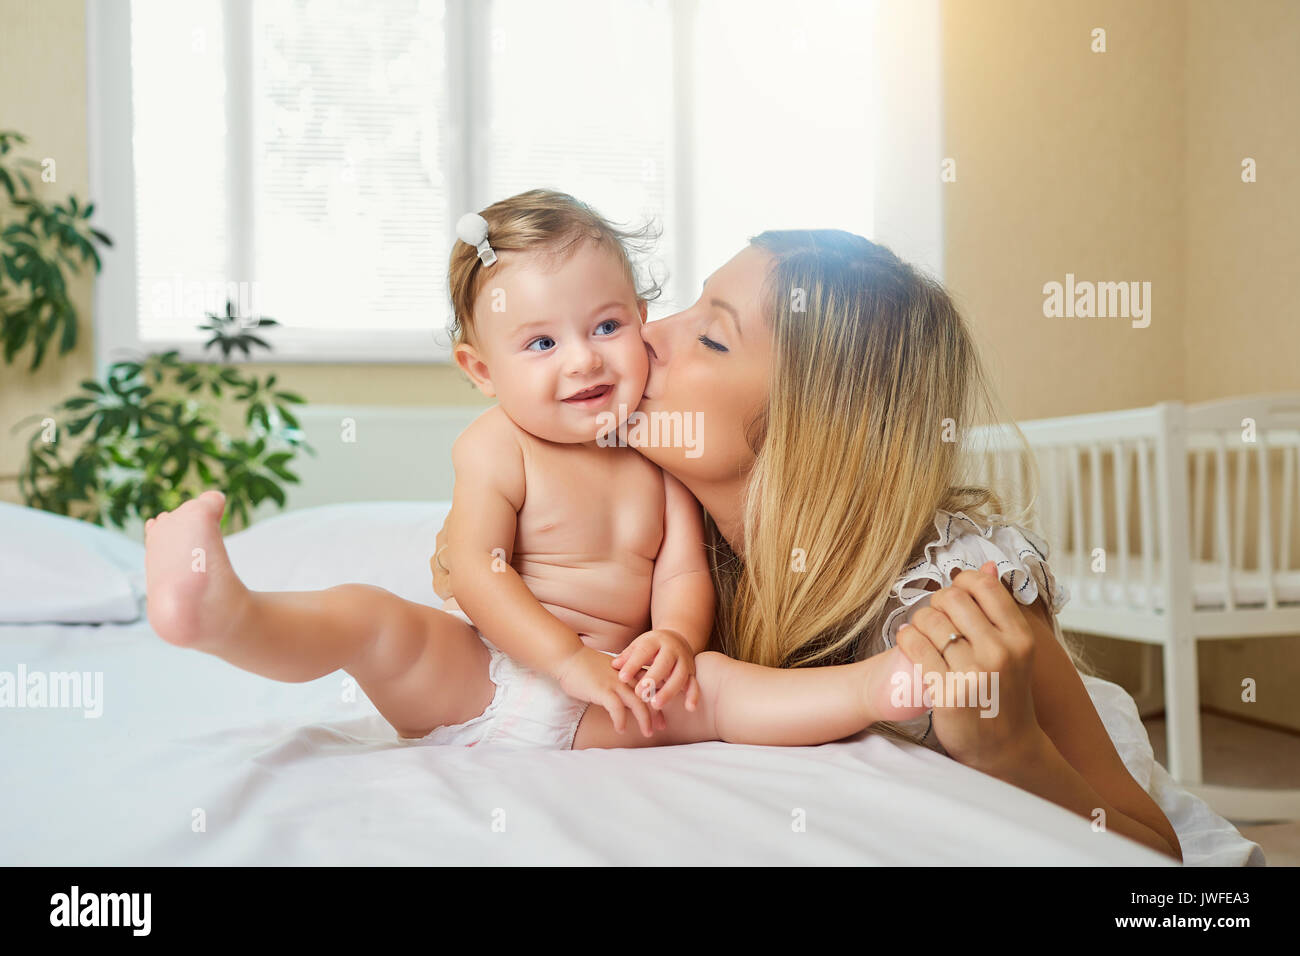 Mother and baby in a diaper play hugging on a bed indoors.  Stock Photo